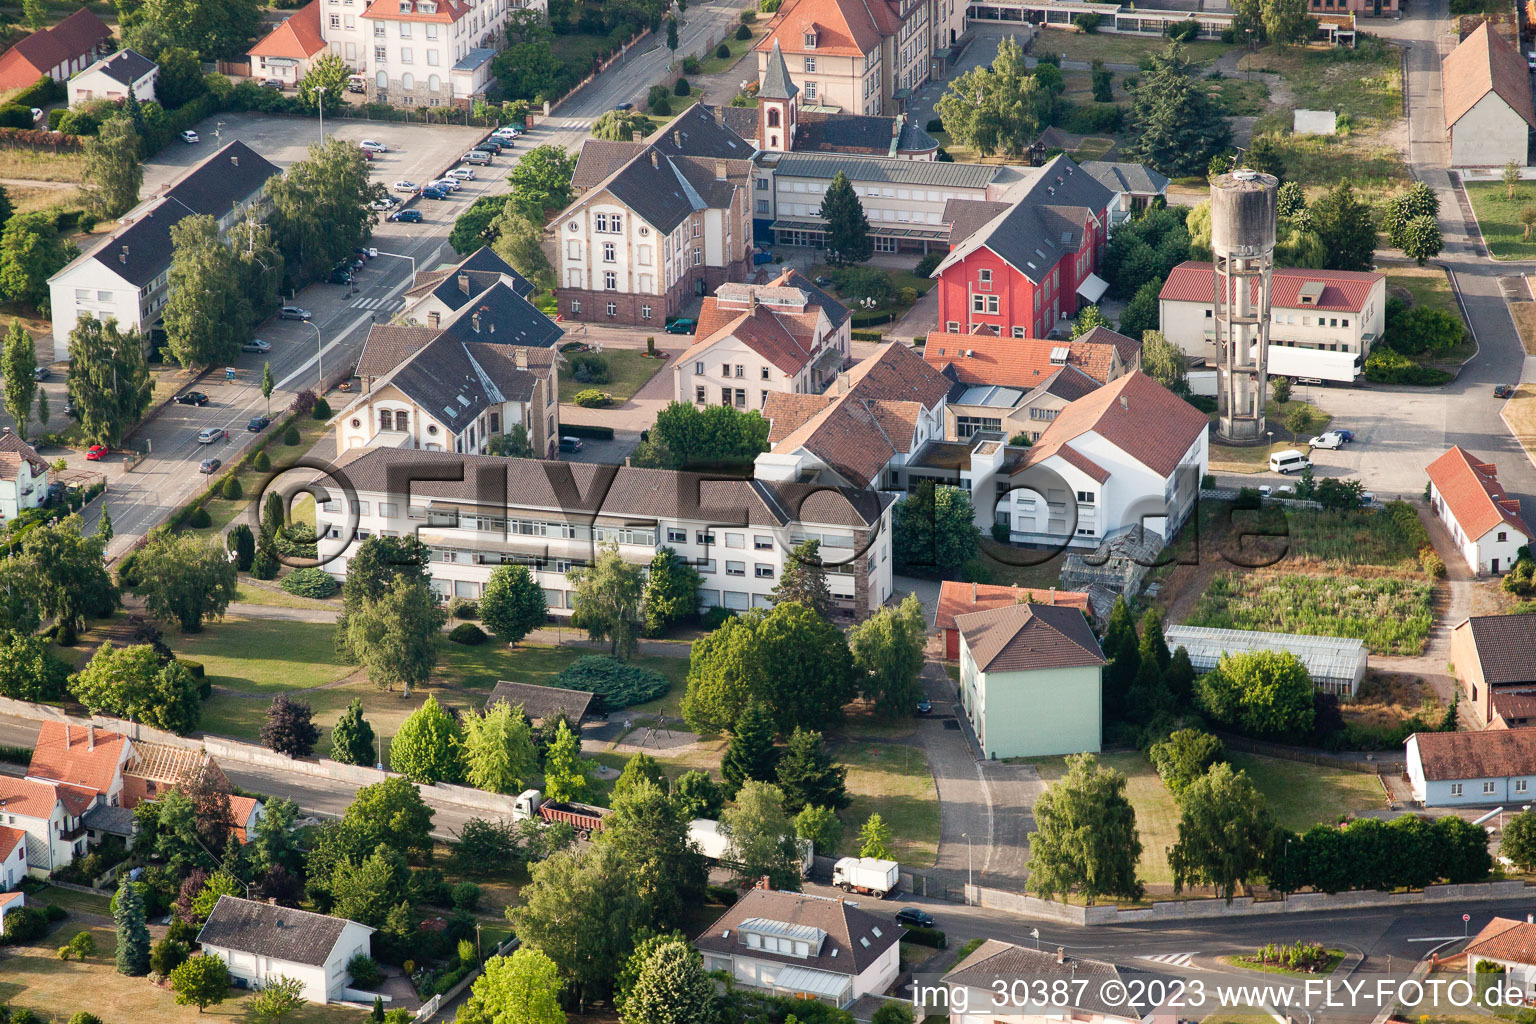 Bischwiller in the state Bas-Rhin, France seen from a drone